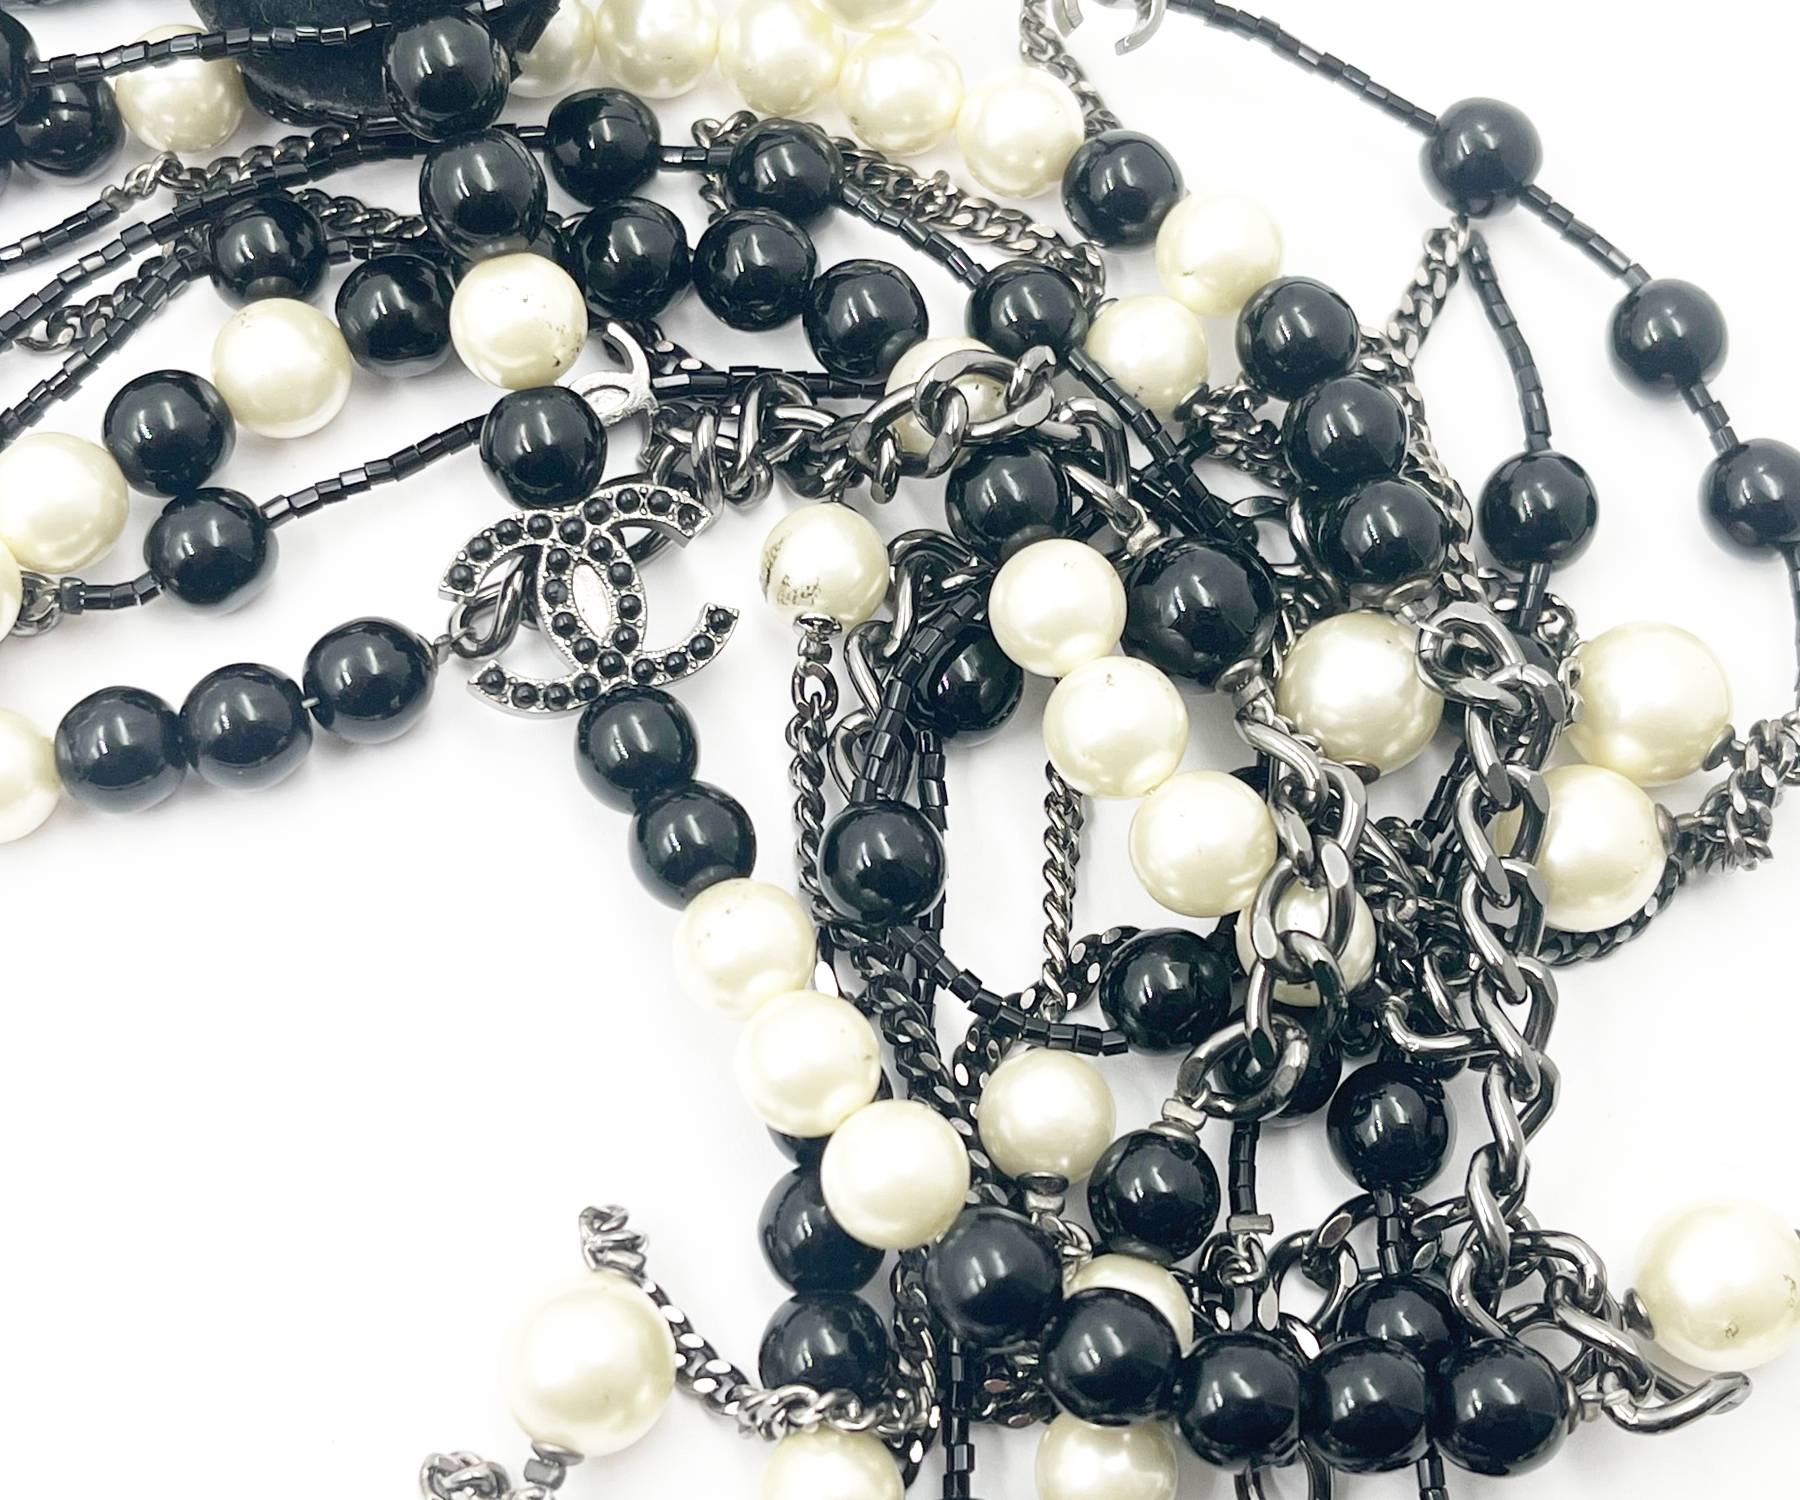 Chanel Black CC Beaded Flower Pin Black Bead Pearl 5 Strand Necklace